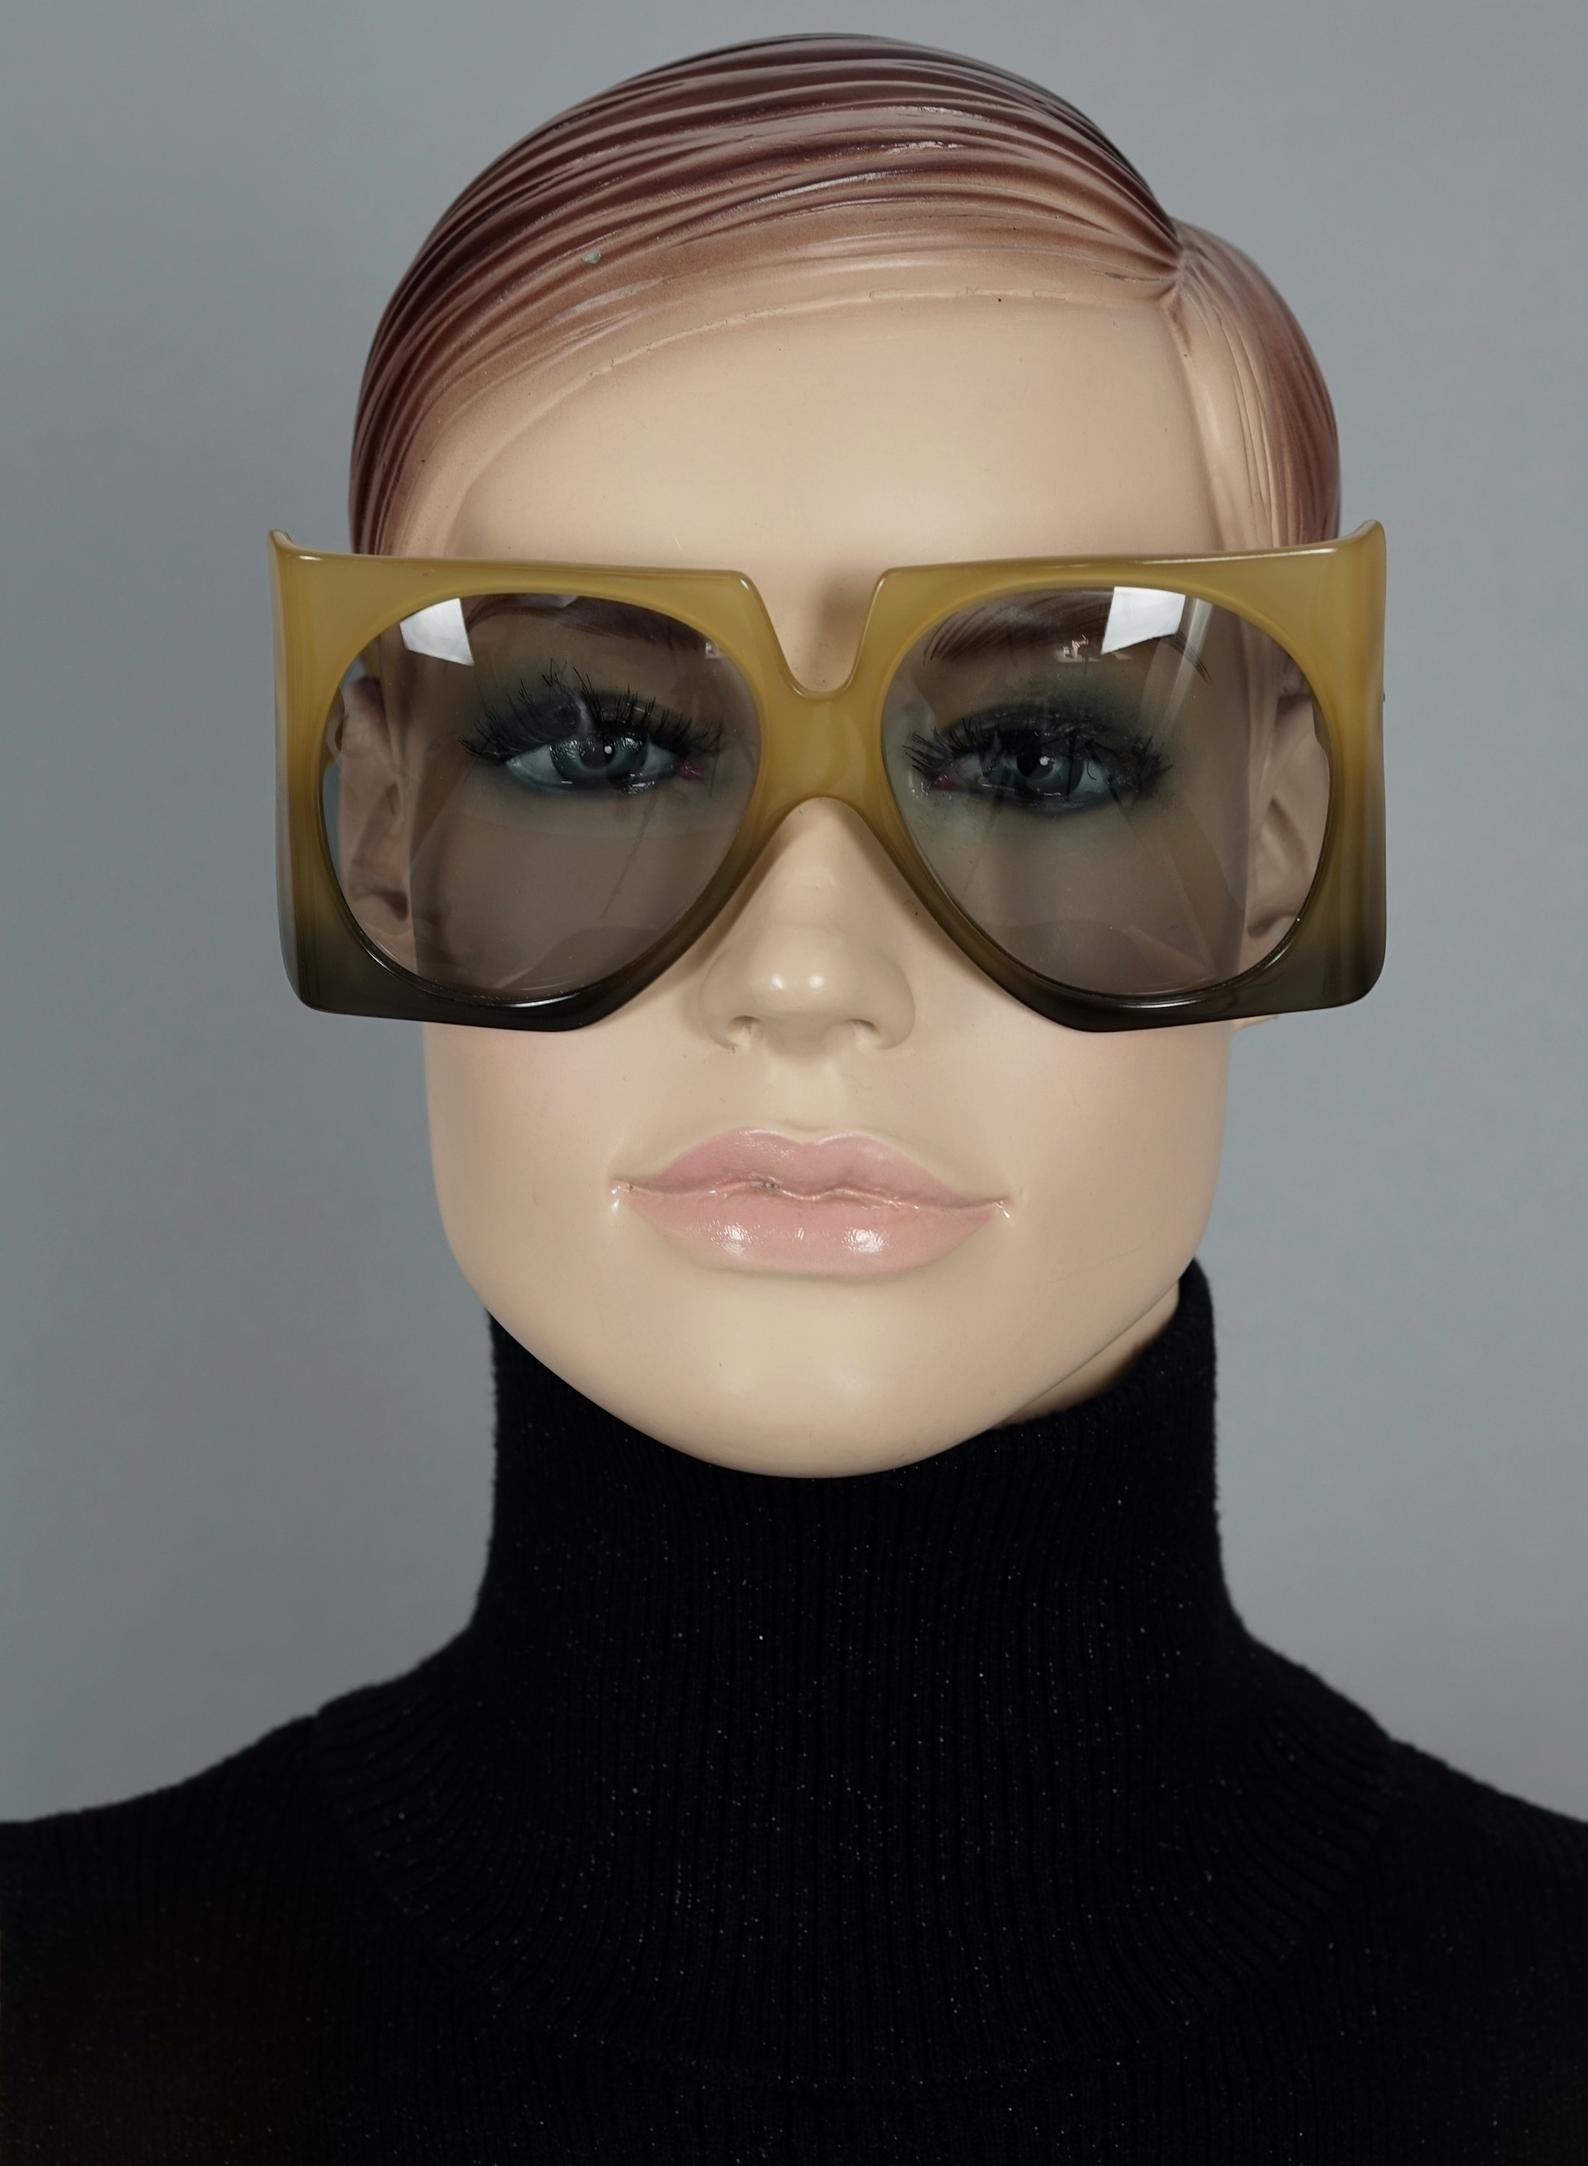 Vintage 1970s CHRISTIAN DIOR Oversized Square Space Age Sunglasses

Measurements:
Height: 2.75 inches (7 cm)
Horizontal Width: 5.98 inches (15.2 cm)
Temple Length: 4.13 inches (10.5 cm)

Features:
- 100% Authentic CHRISTIAN DIOR.
- Dramatic